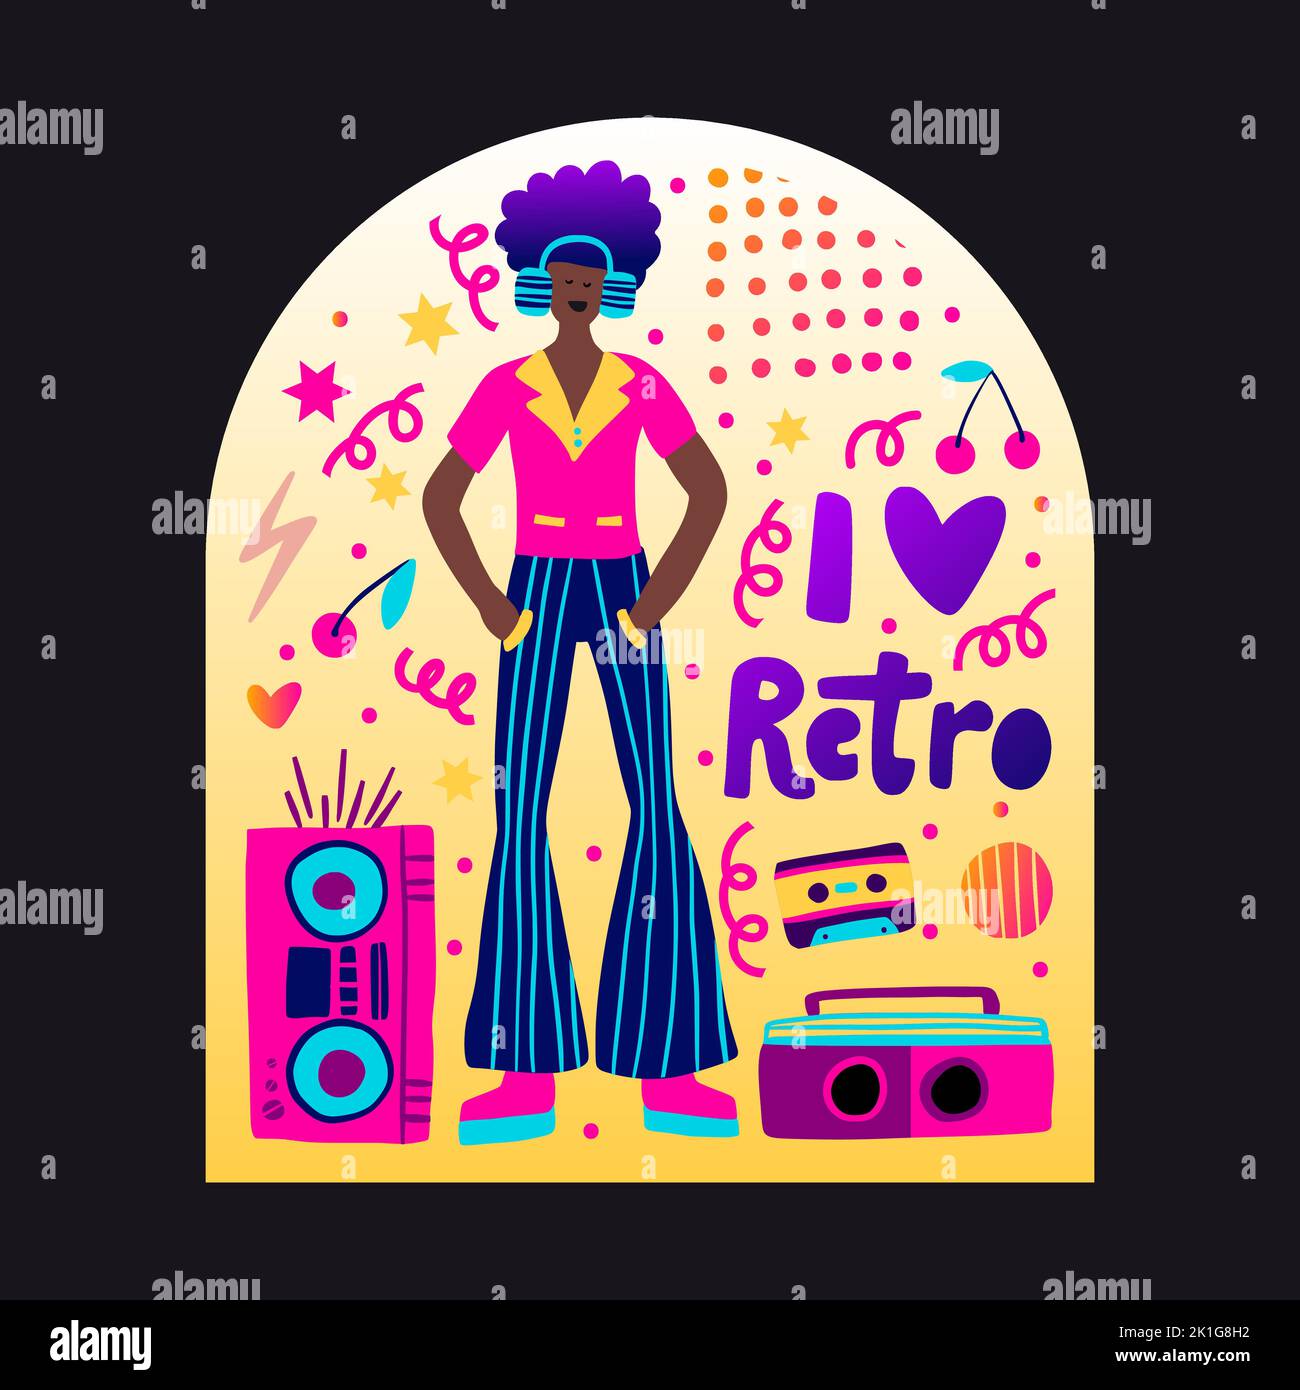 Retro party 80s music African American man poster with gradient lettering 70s vintage disco dance flyer, cartoon character vector person Stock Vector